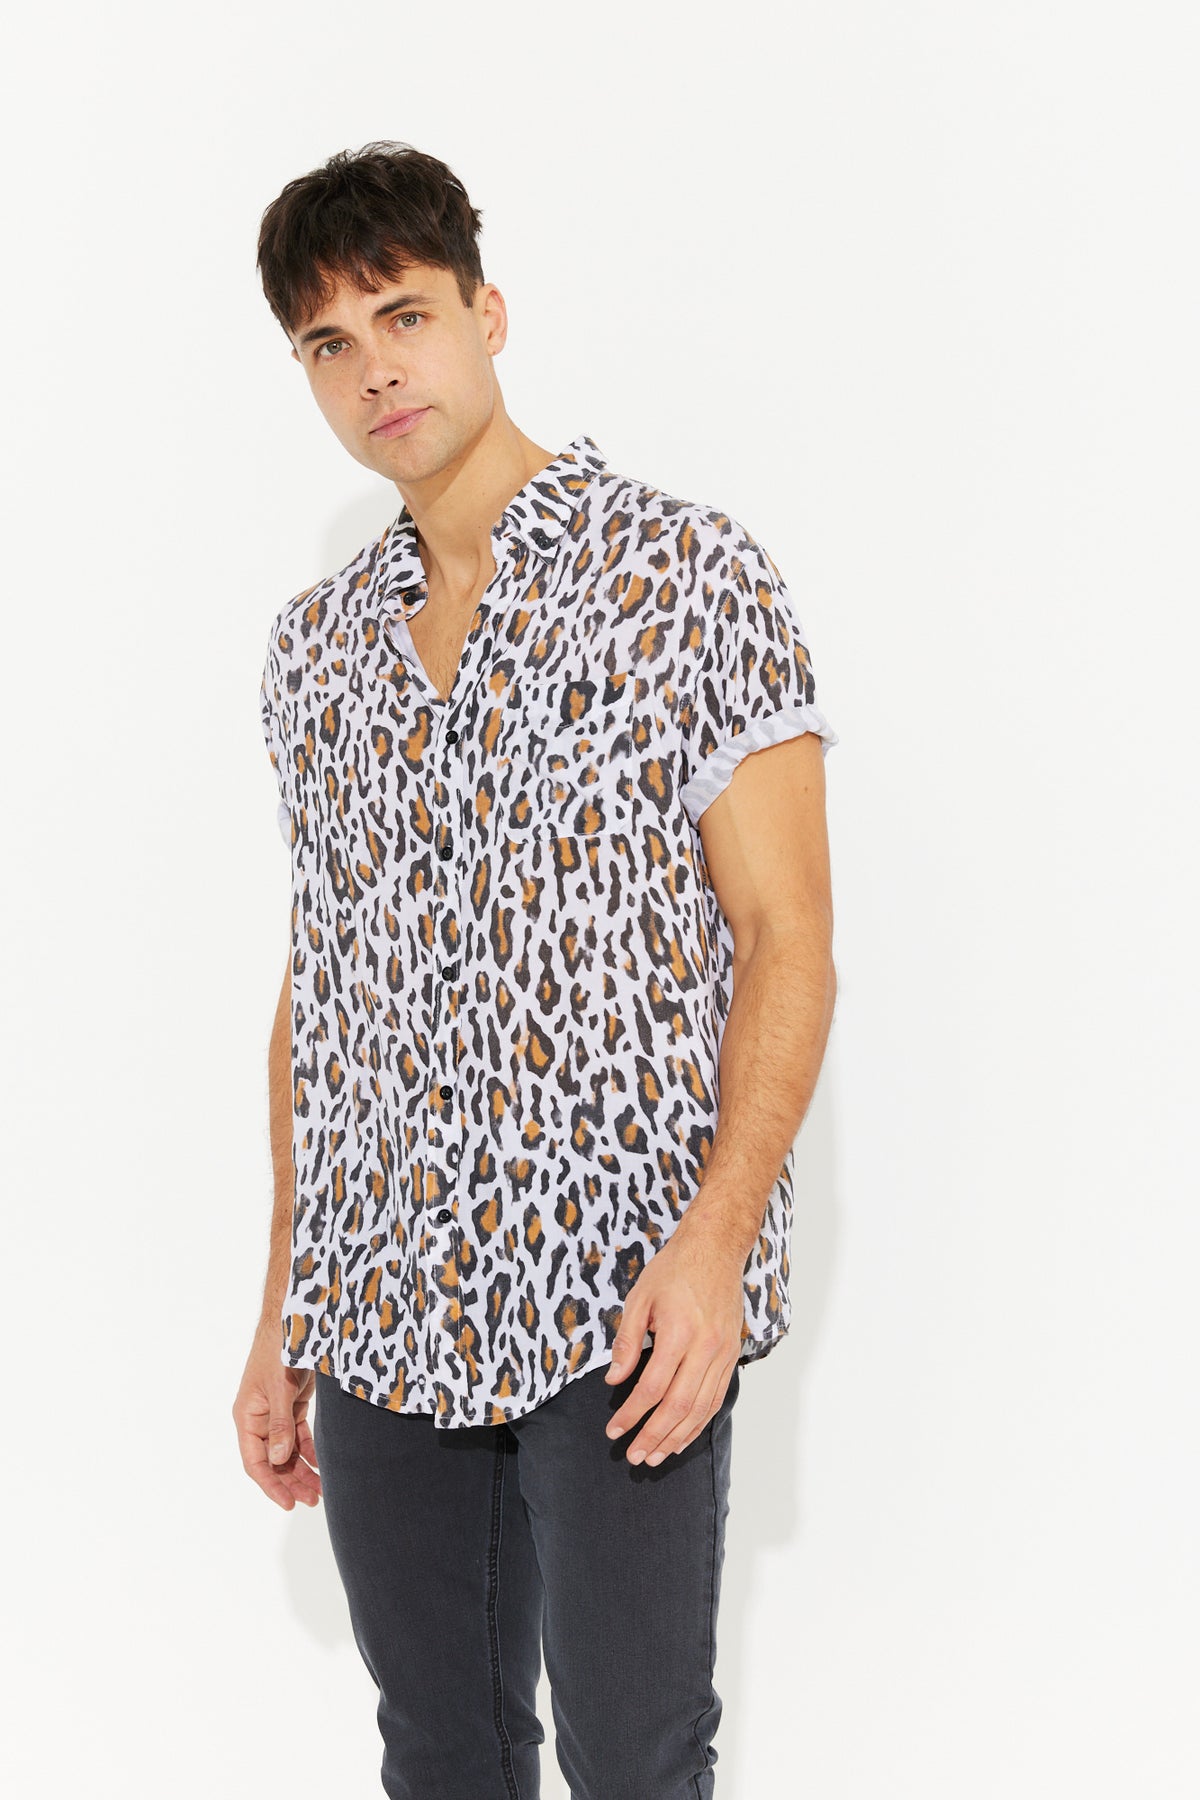 Jack Boating Button Up Shirt Rayon Wild Cat